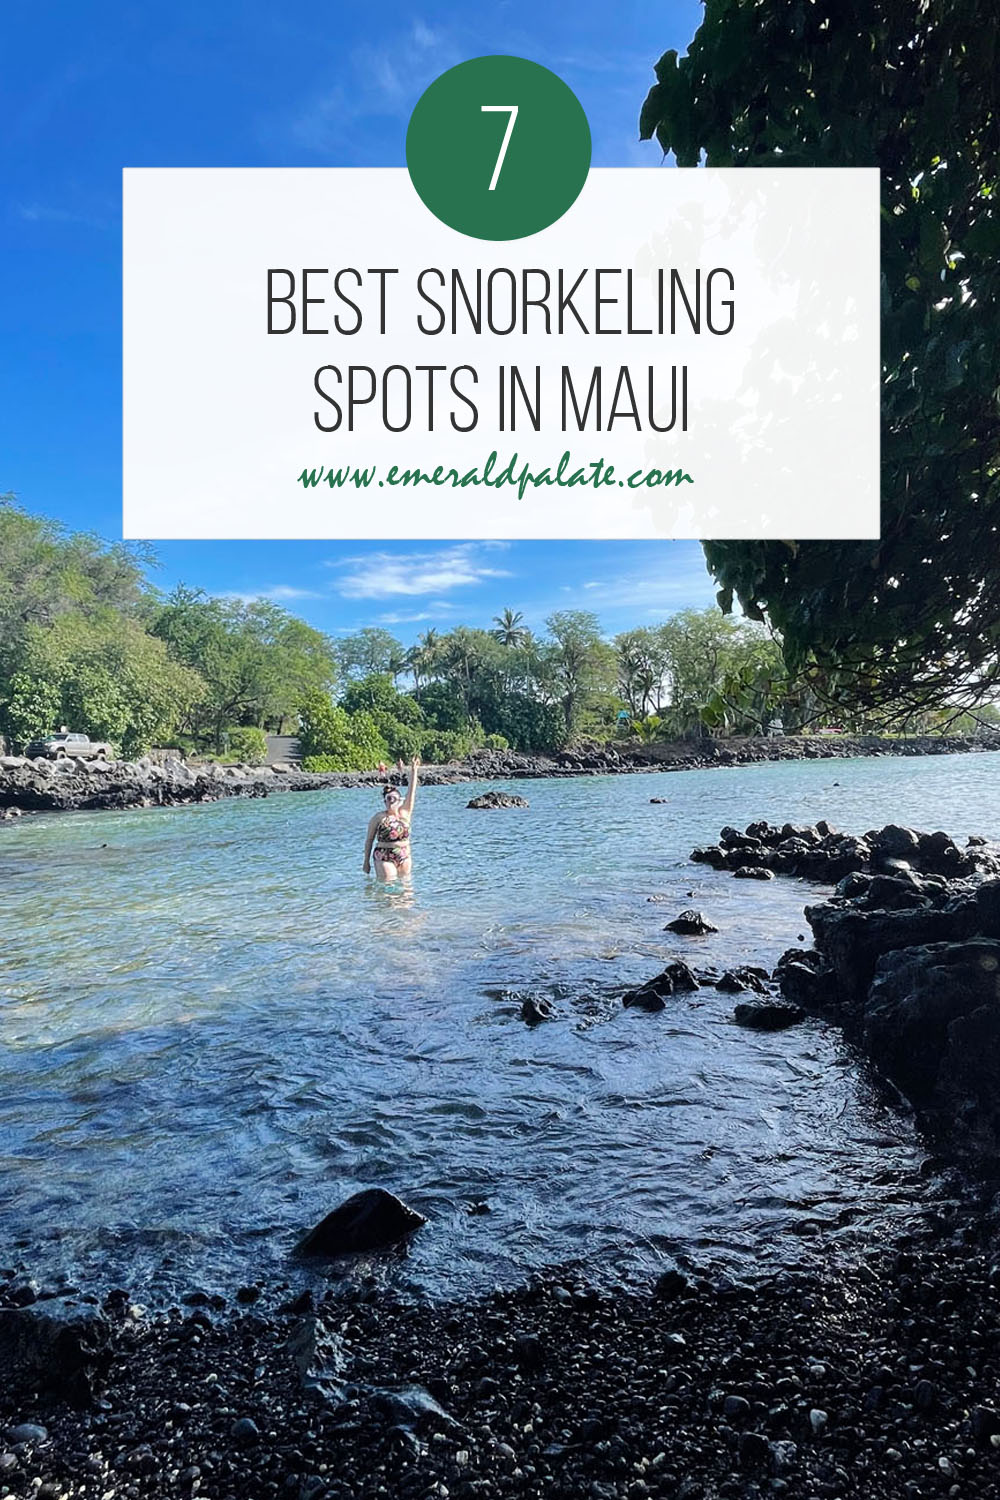 The best snorkeling spots in Maui. From snorkeling beaches in Maui to Maui snorkel excursions and tours, here are all the best places for seeing marine life and sea turtles in Maui.